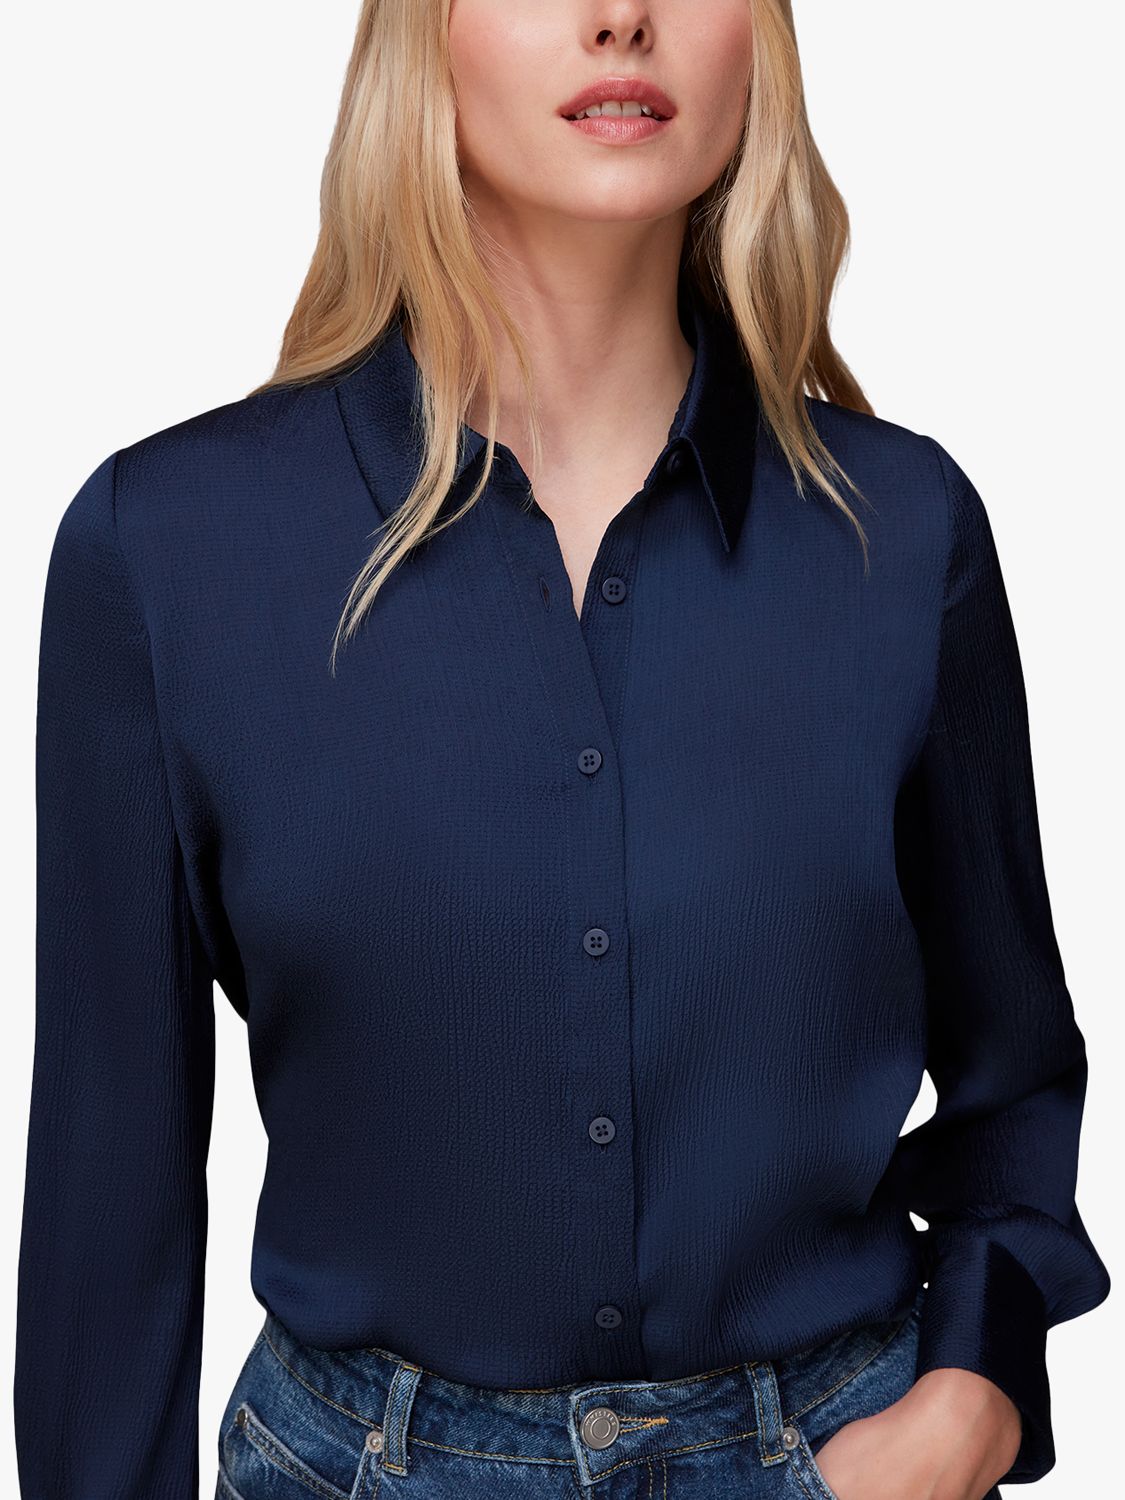 Women's Tops Sale, T-Shirts, Blouses & Shirts, Whistles US